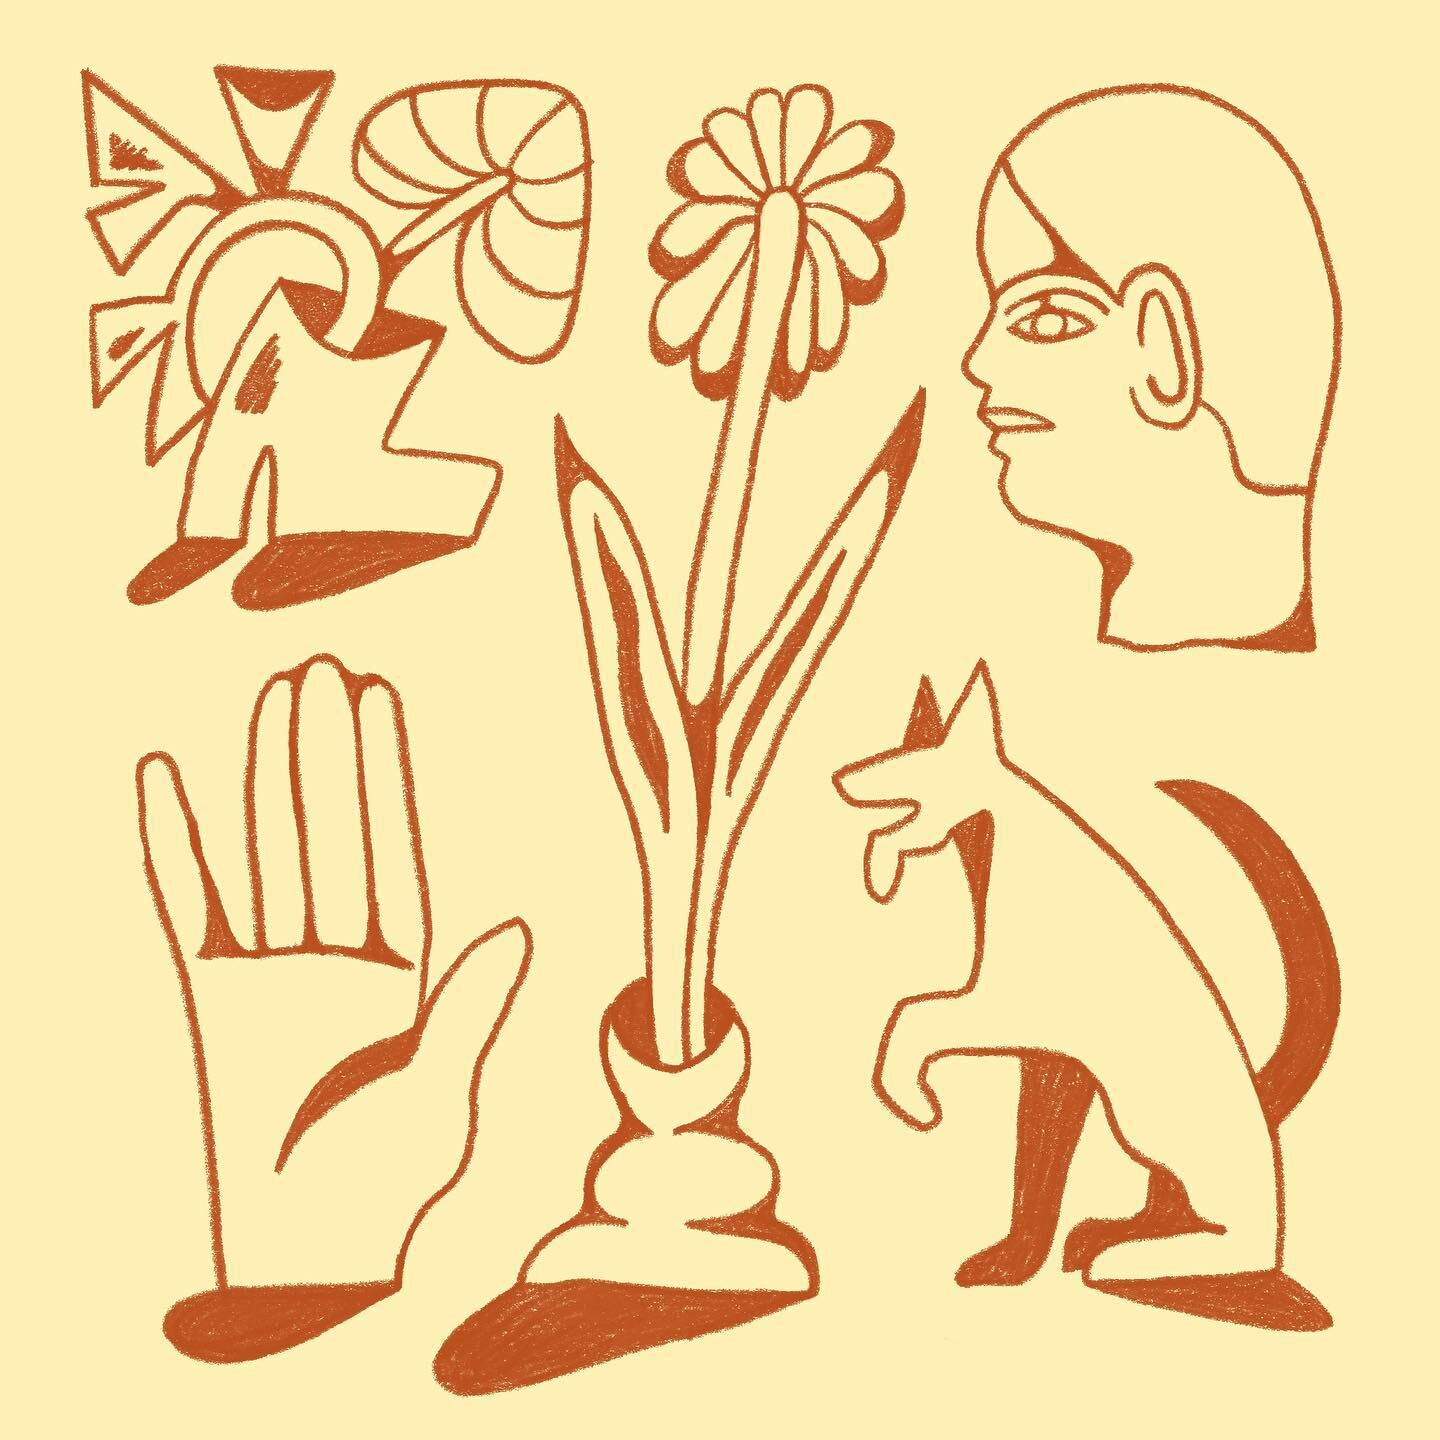 Boot-quet, Person Head, Severed Hand, Tall Daisy Turns its Back on You, and An German Shepherd